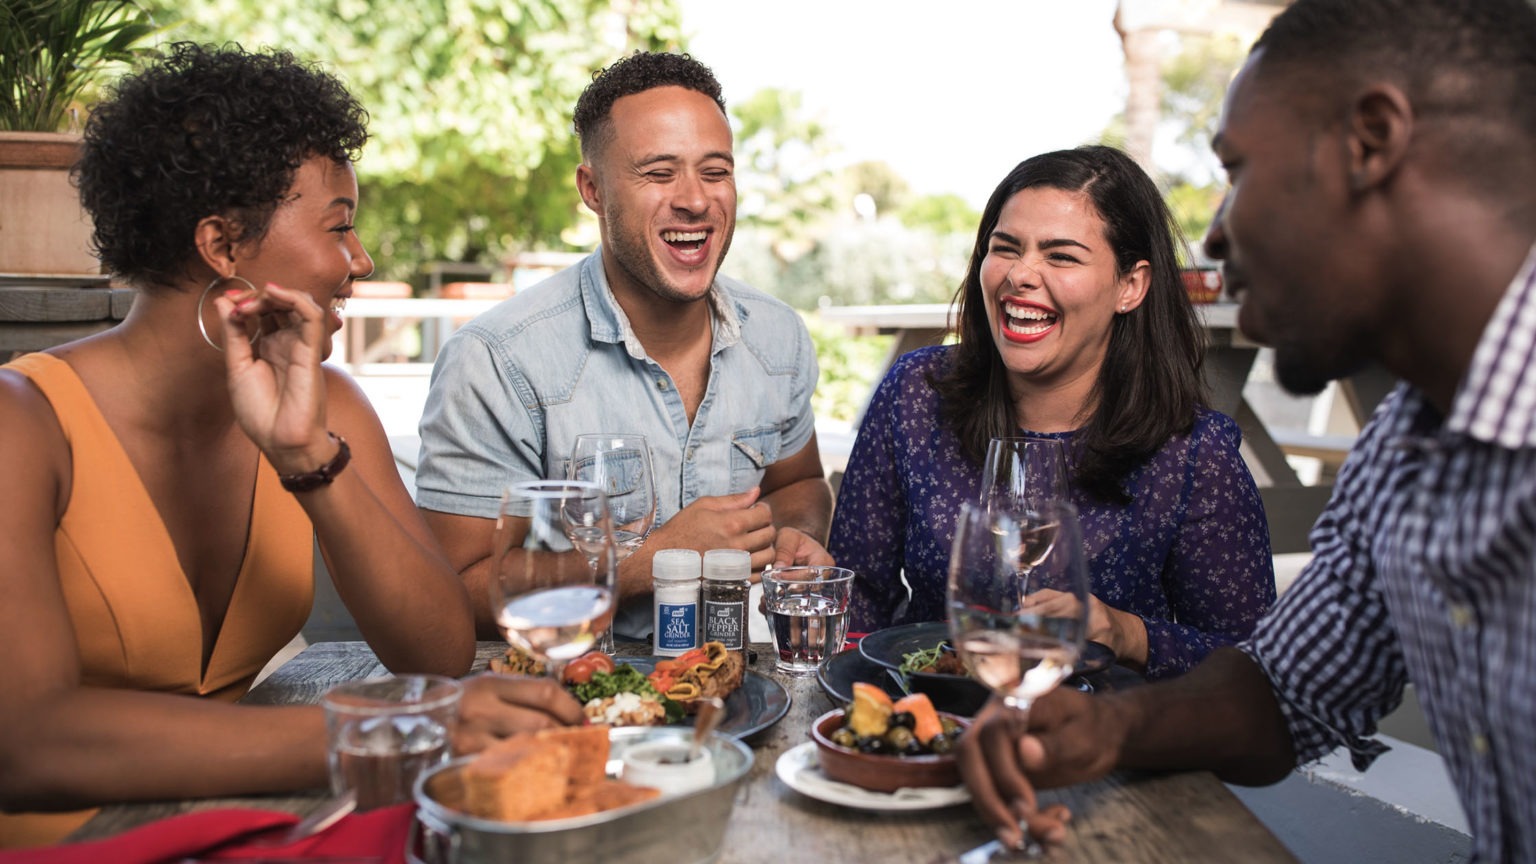 Four people are laughing while having dinner together